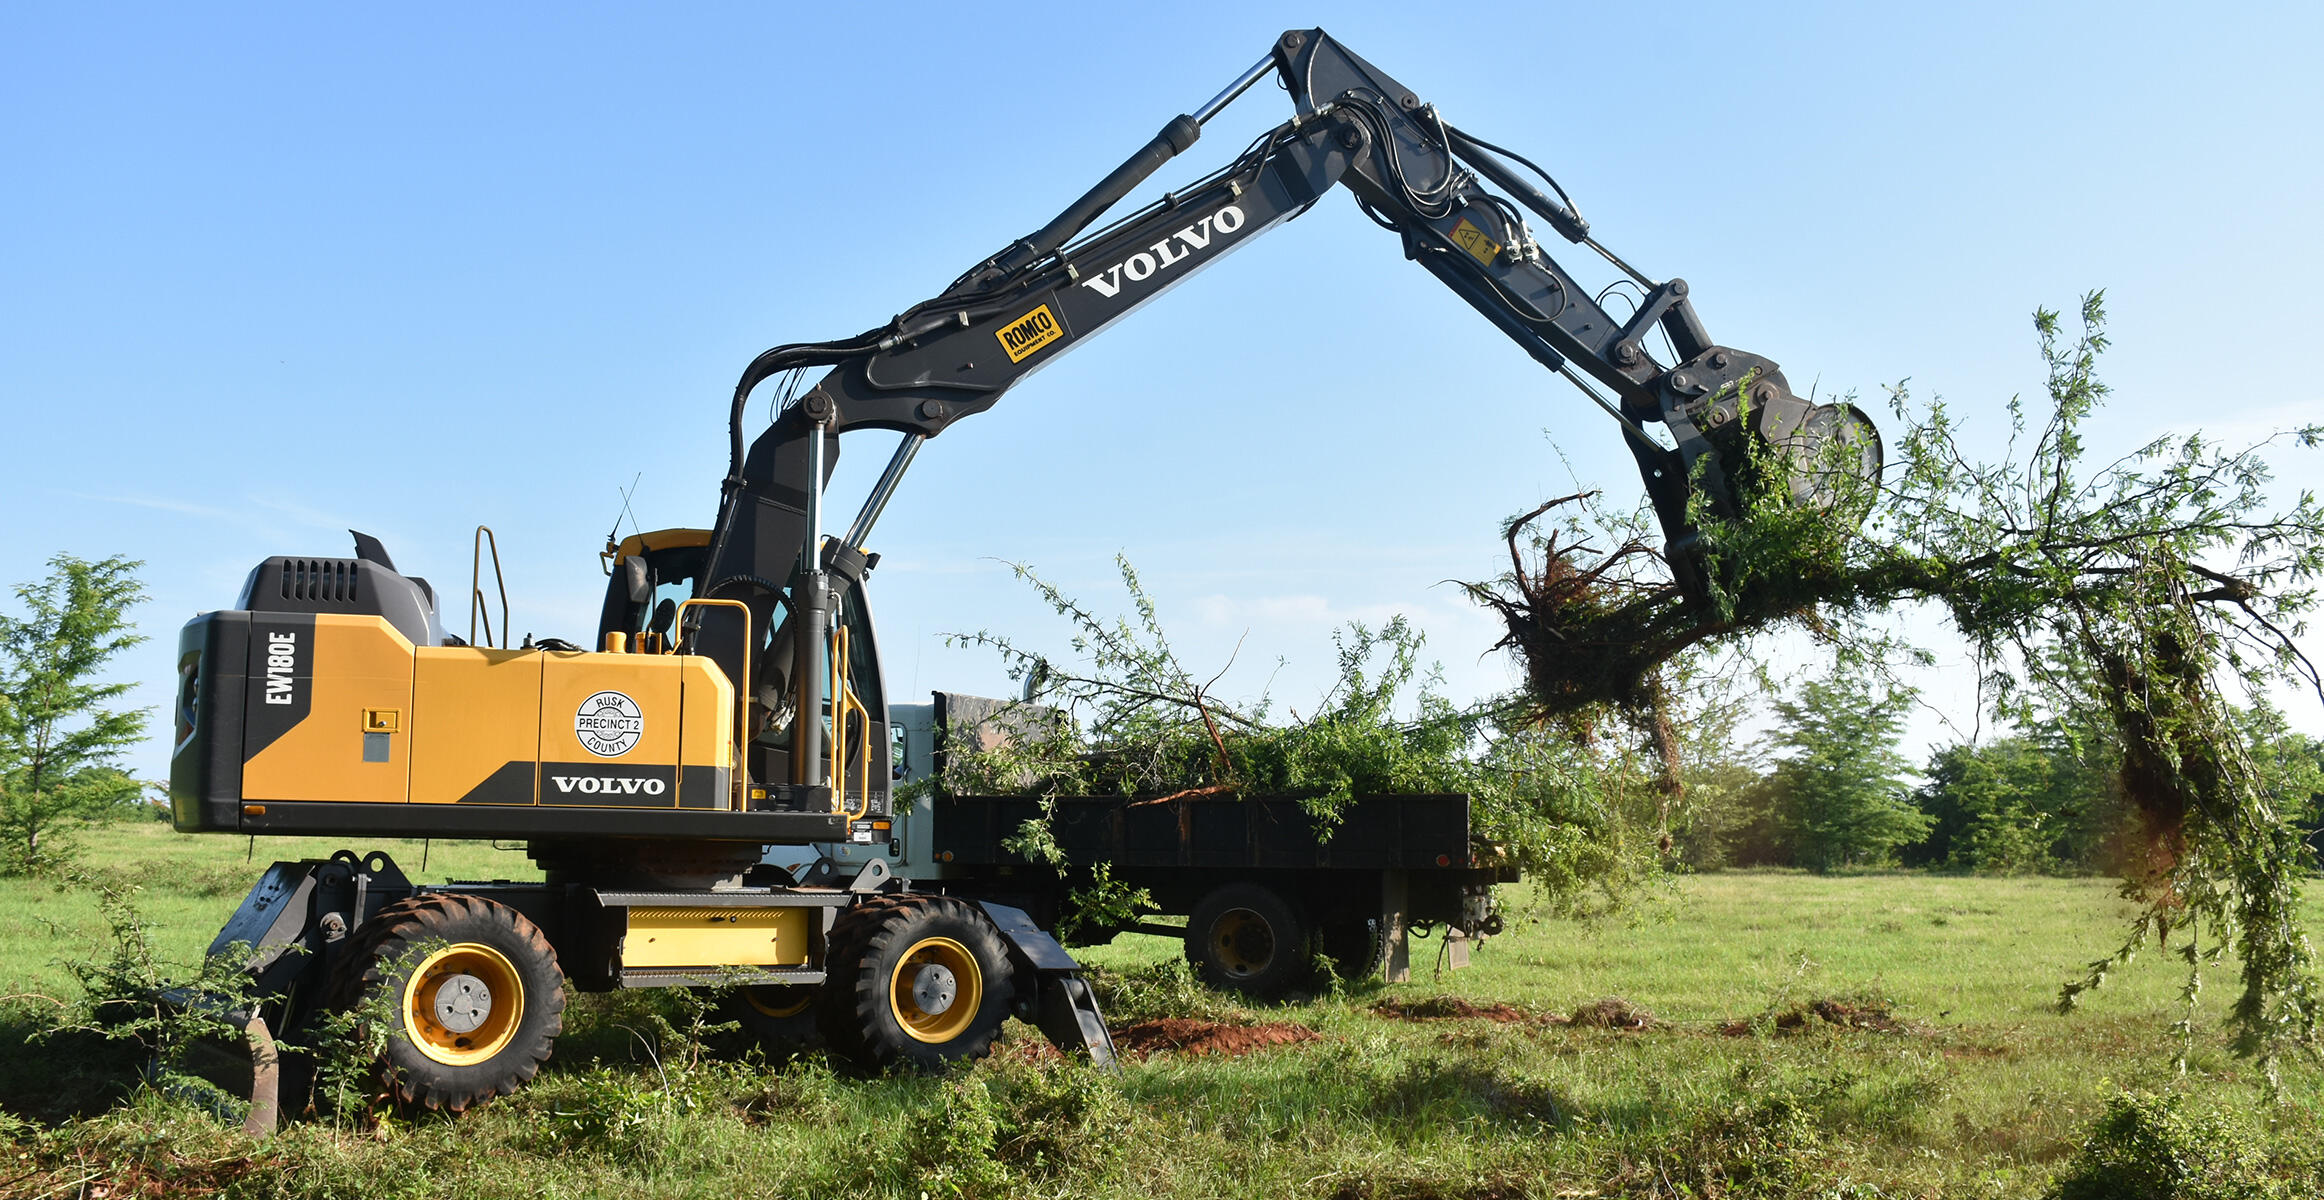 Wheeled excavators used for storm clean-up in Rusk County, Texas